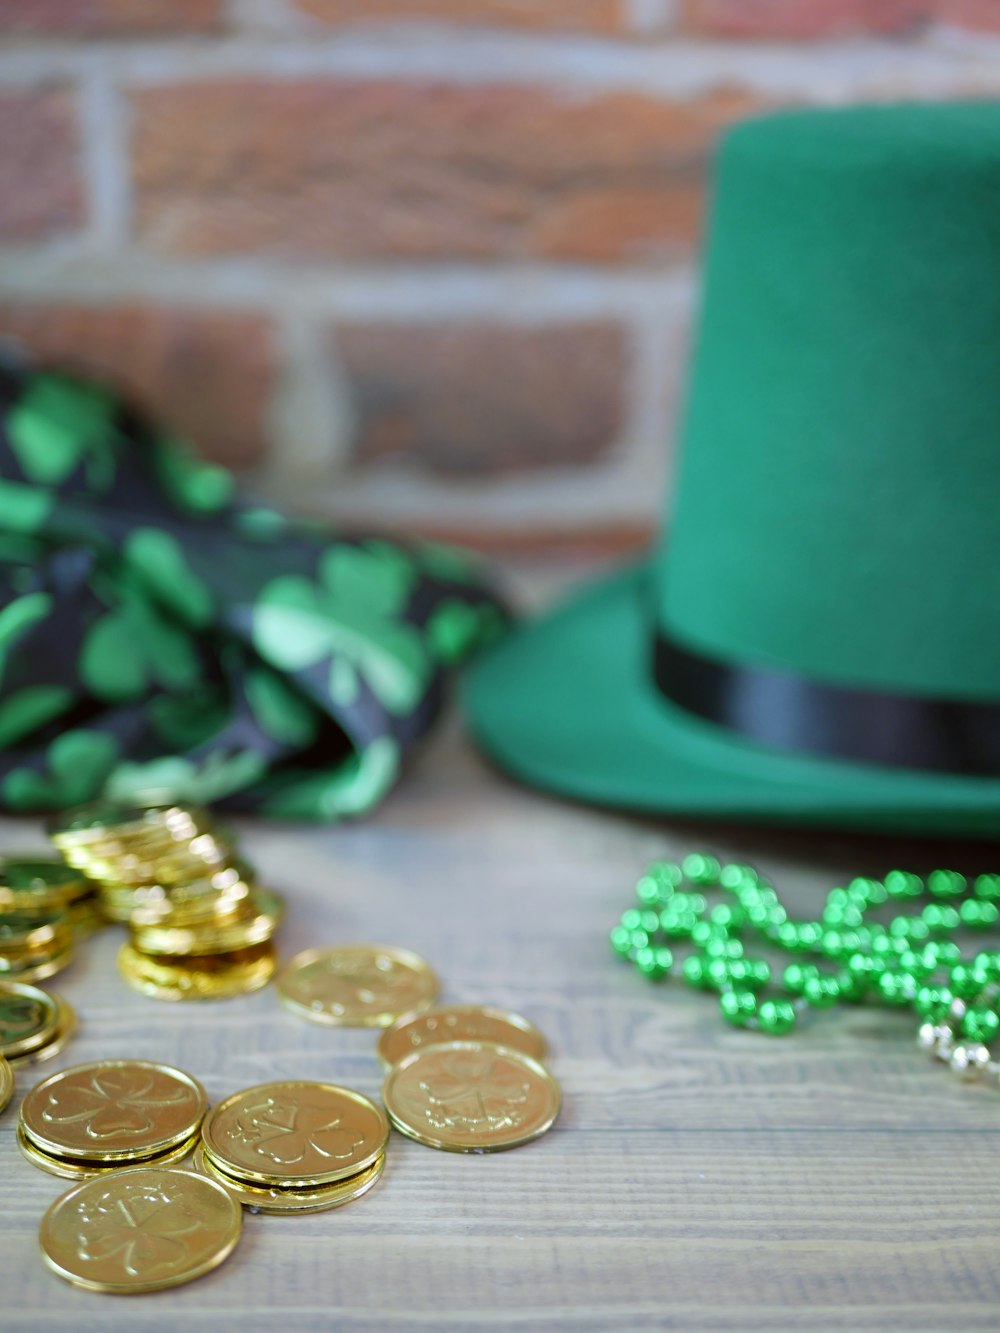 a green hat and some gold coins on a table